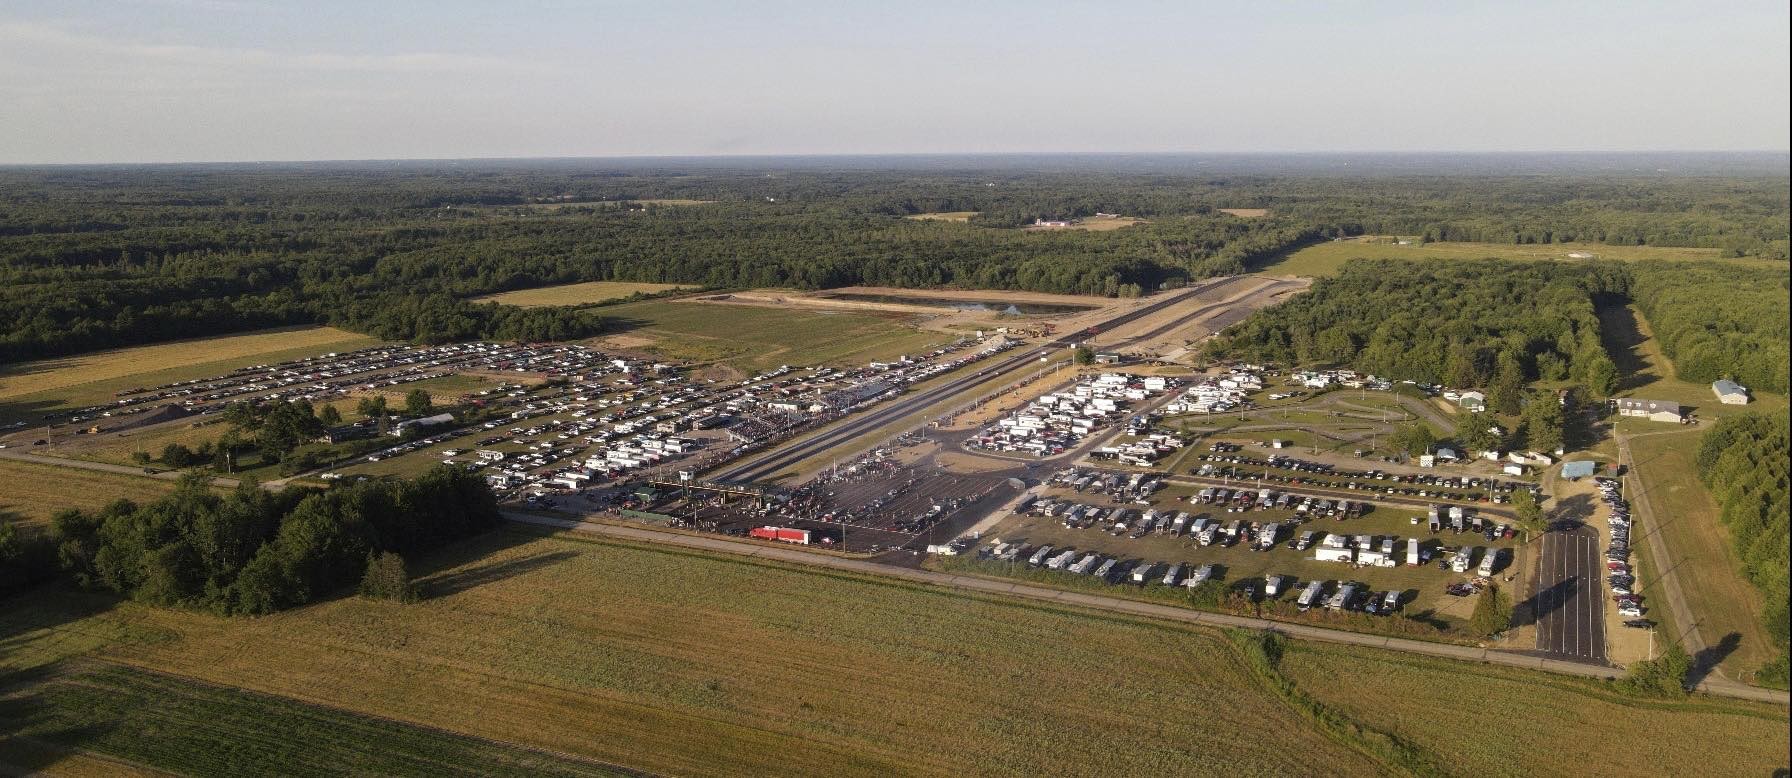 Historic Kuhnle Motorsports Park (Thompson Drag Raceway) Closes, is Available for Lease or Sale